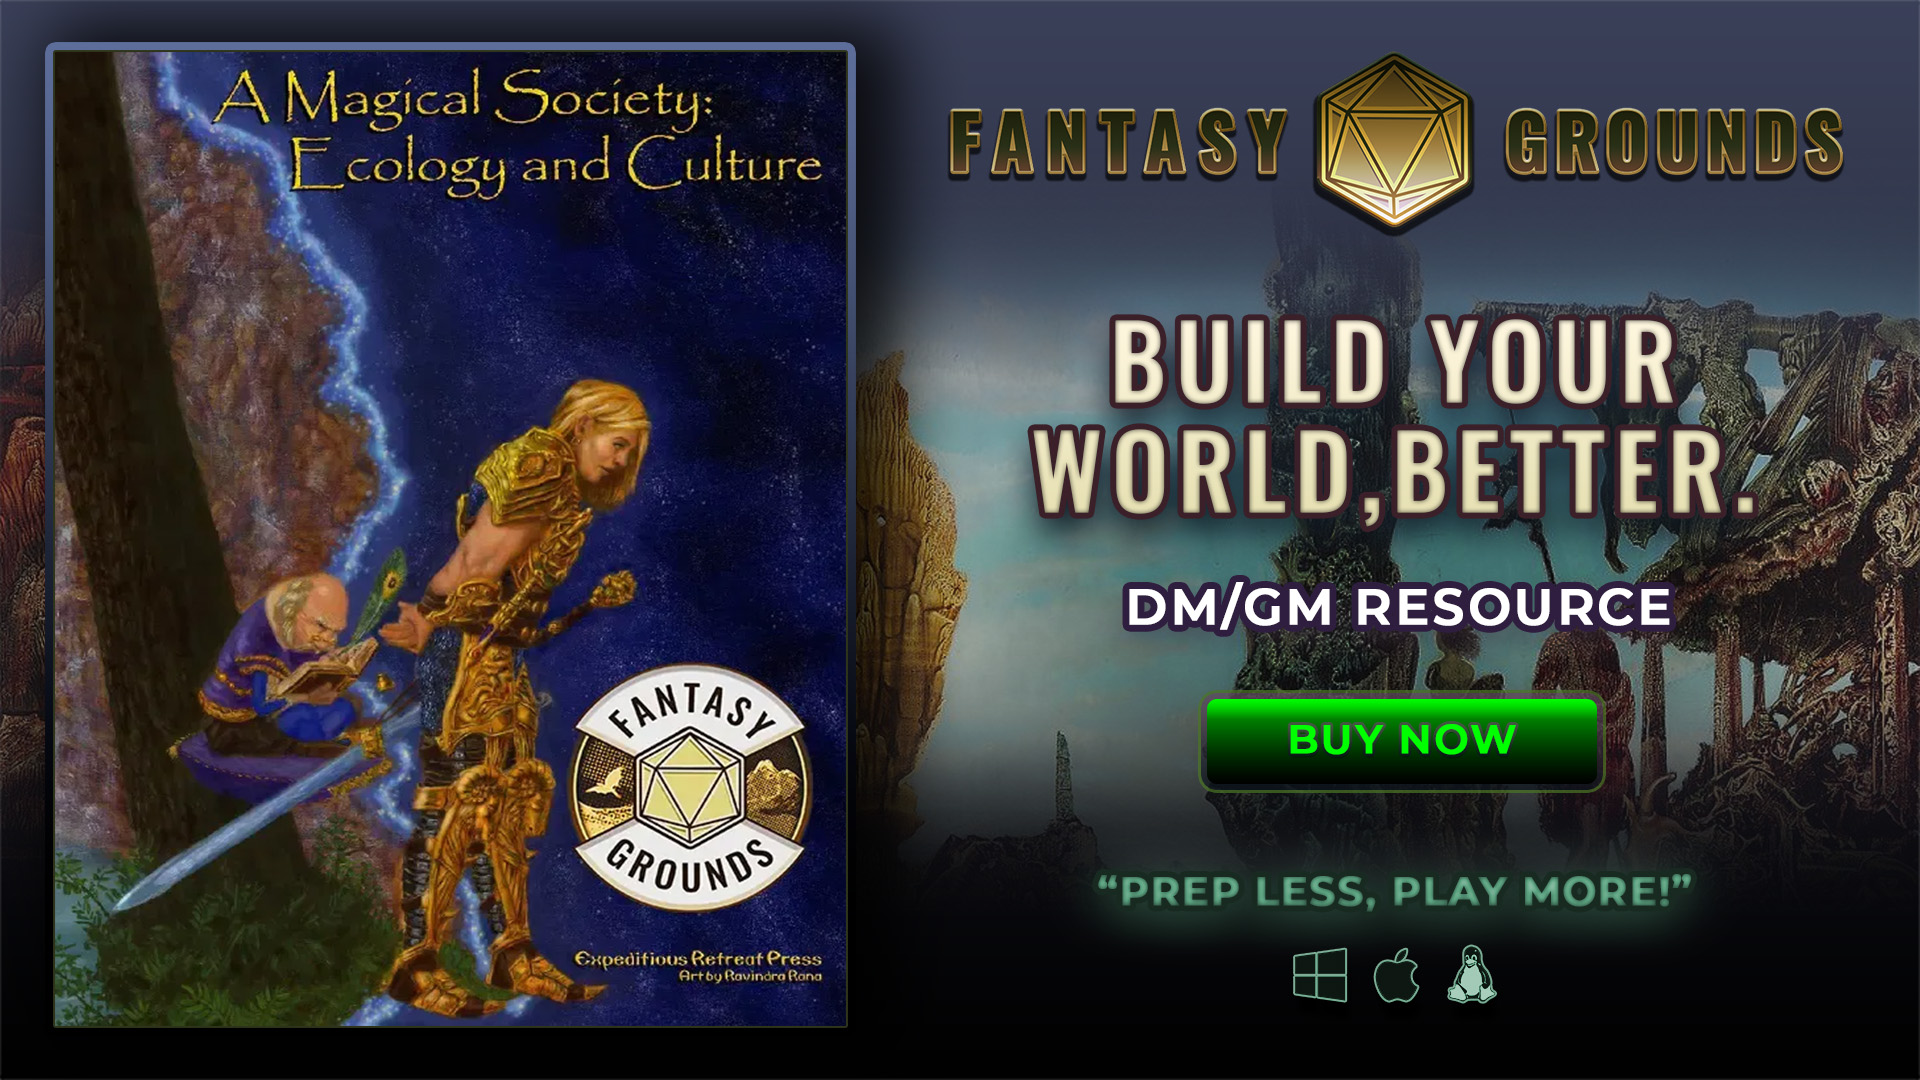 A magical Society - Ecology and Culture (XRP1003).jpg